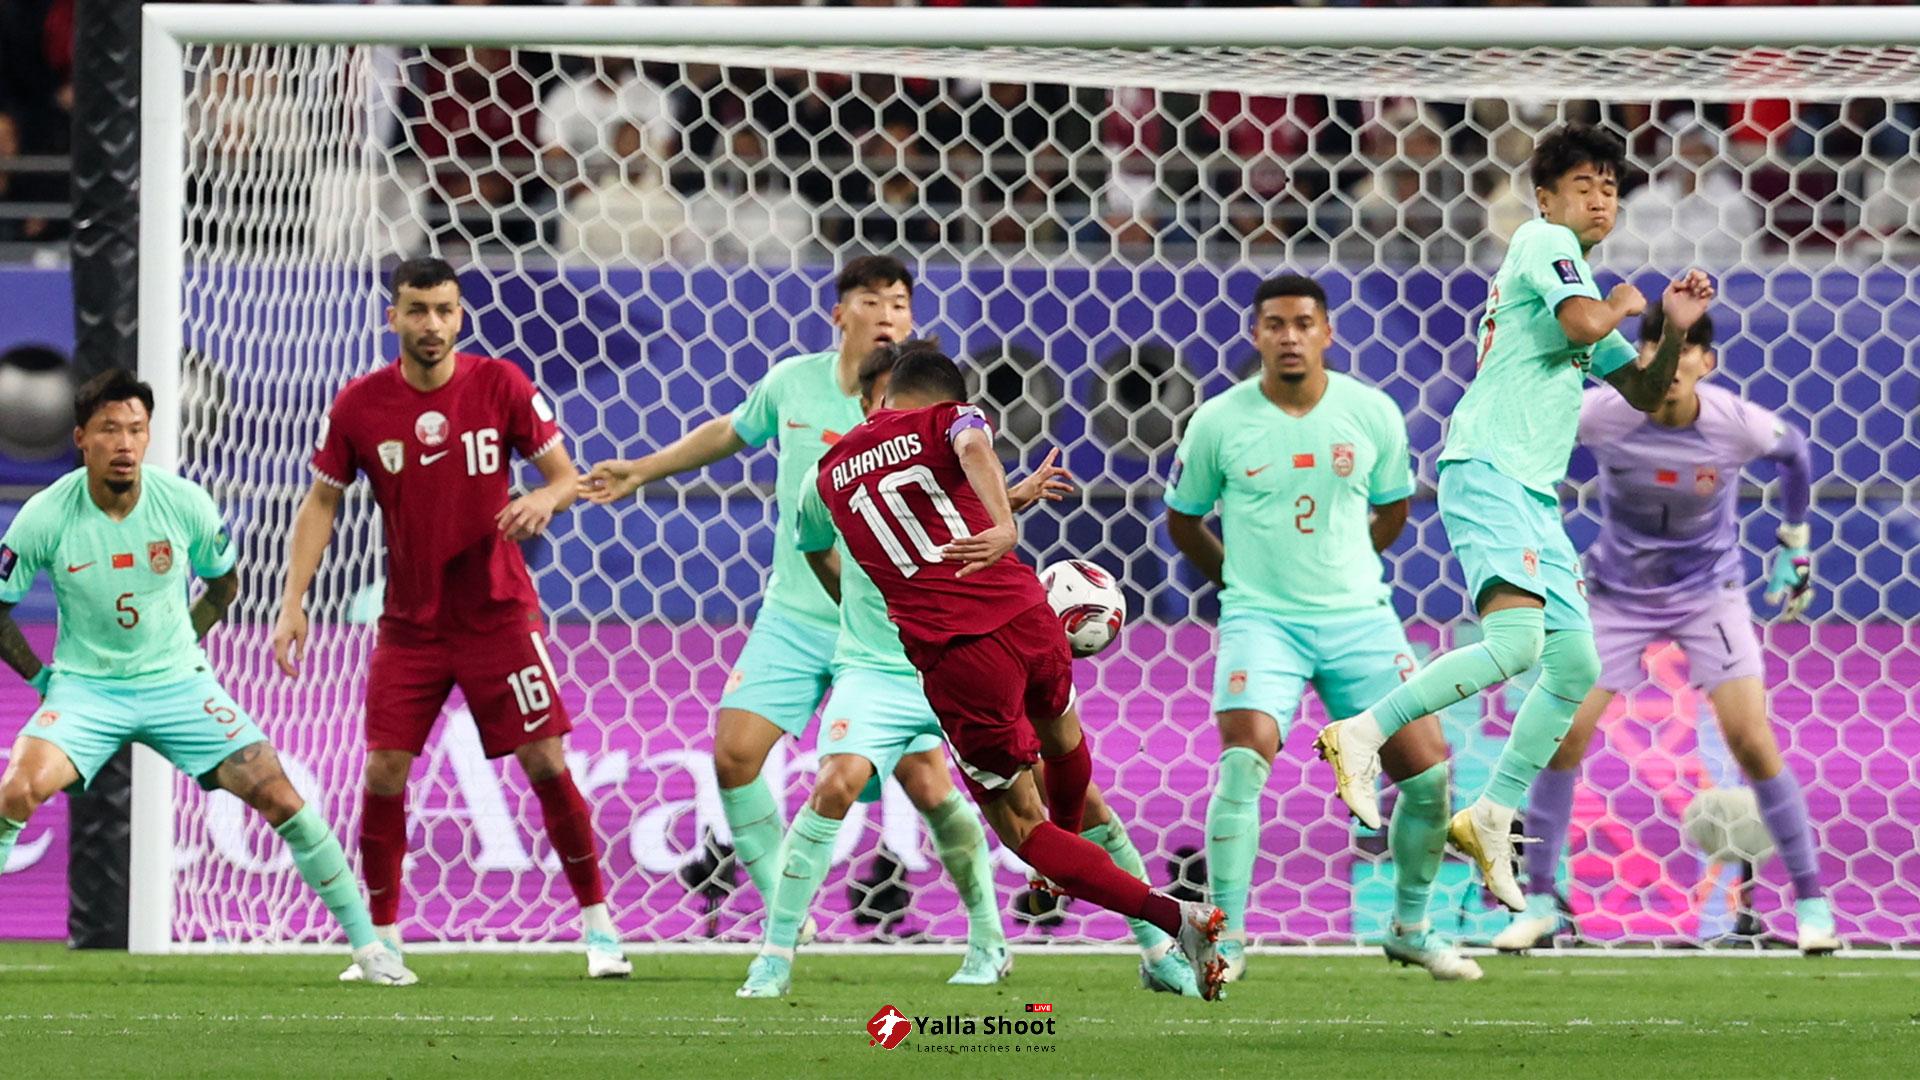 Qatar star scores Asian Cup 'goal of the tournament' with almost identical replica of Paul Scholes iconic Man Utd volley